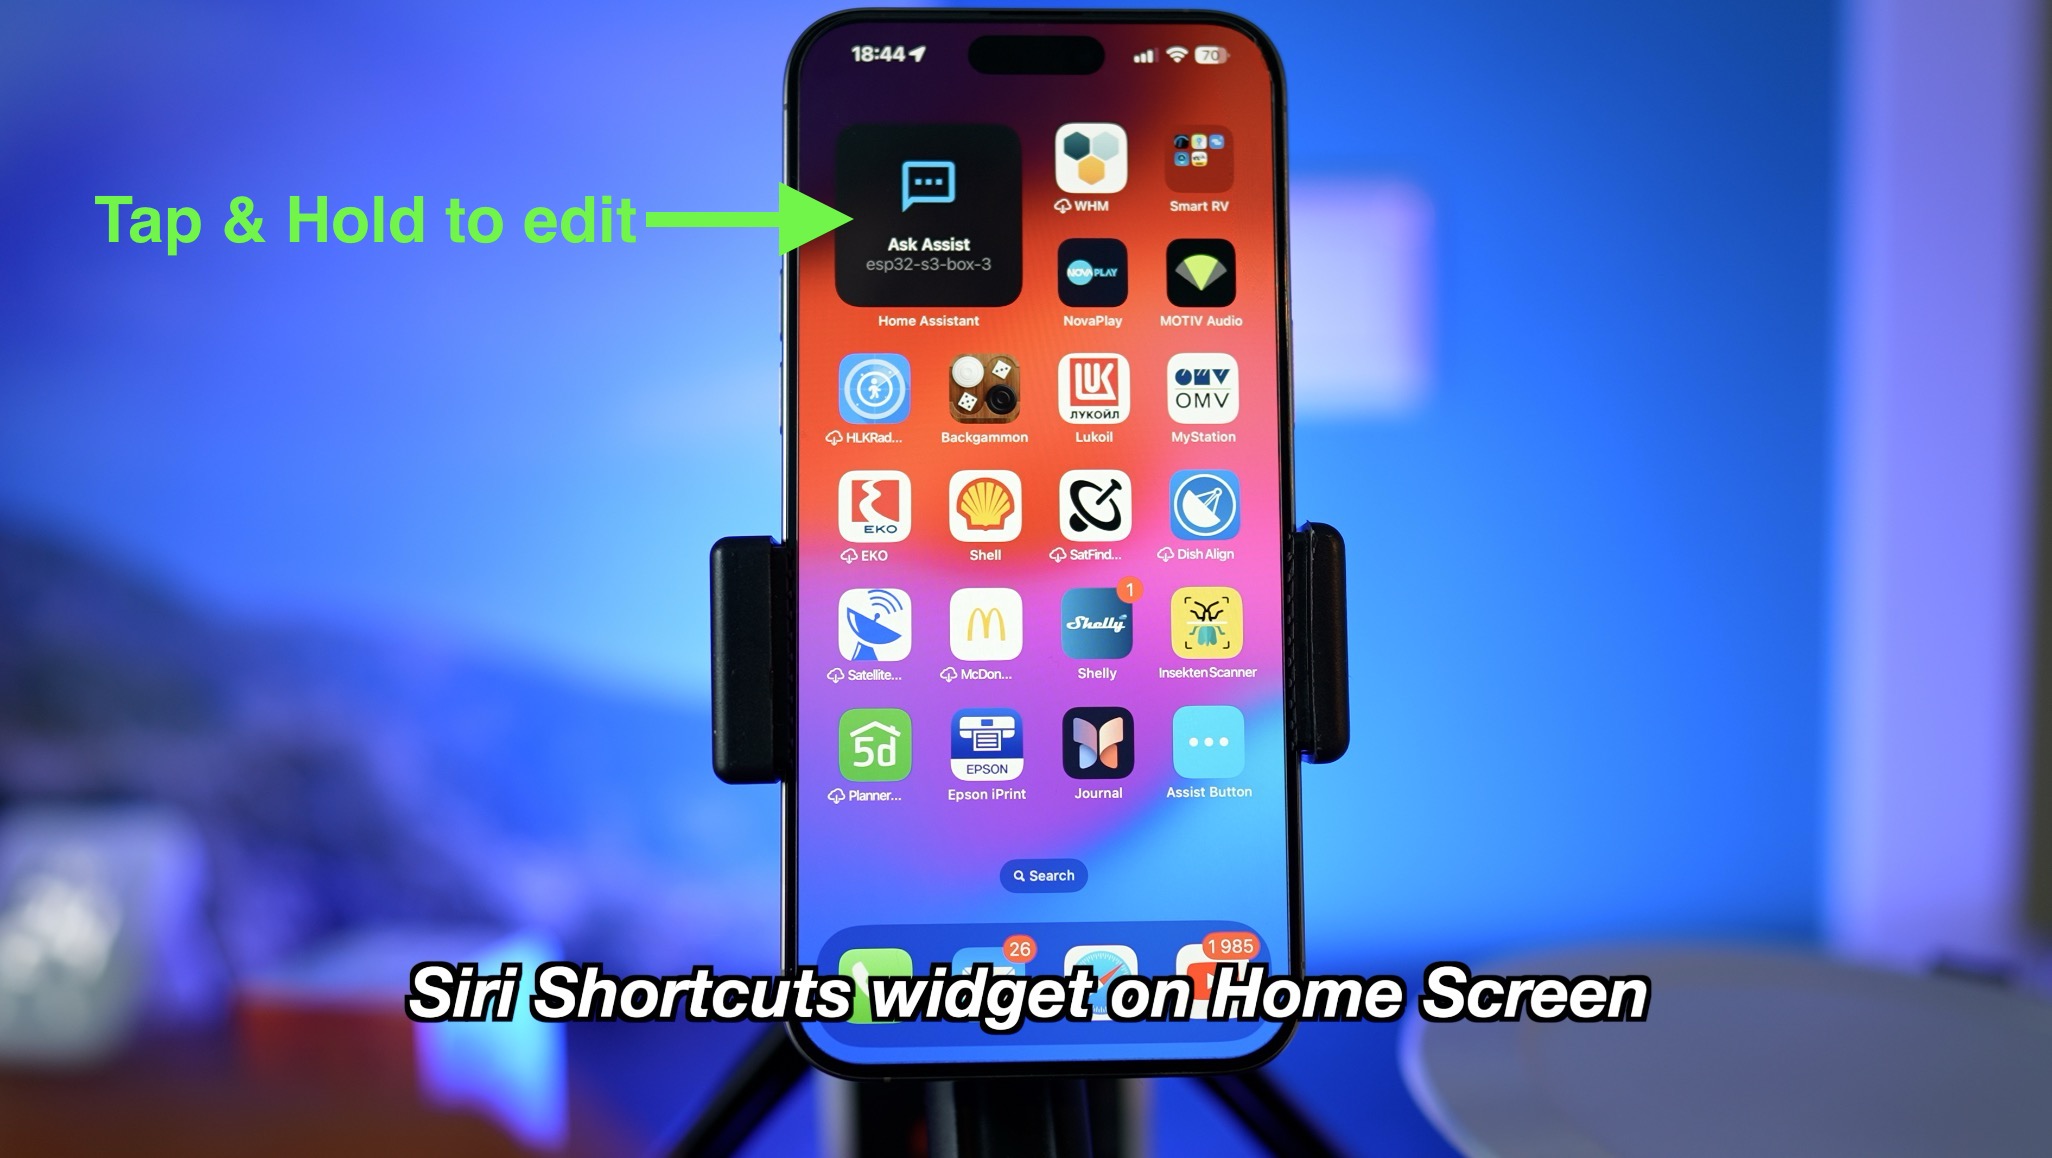 Siri Shortcut widget on Home Screen where the widget is configured for Home Assistant Assist as action